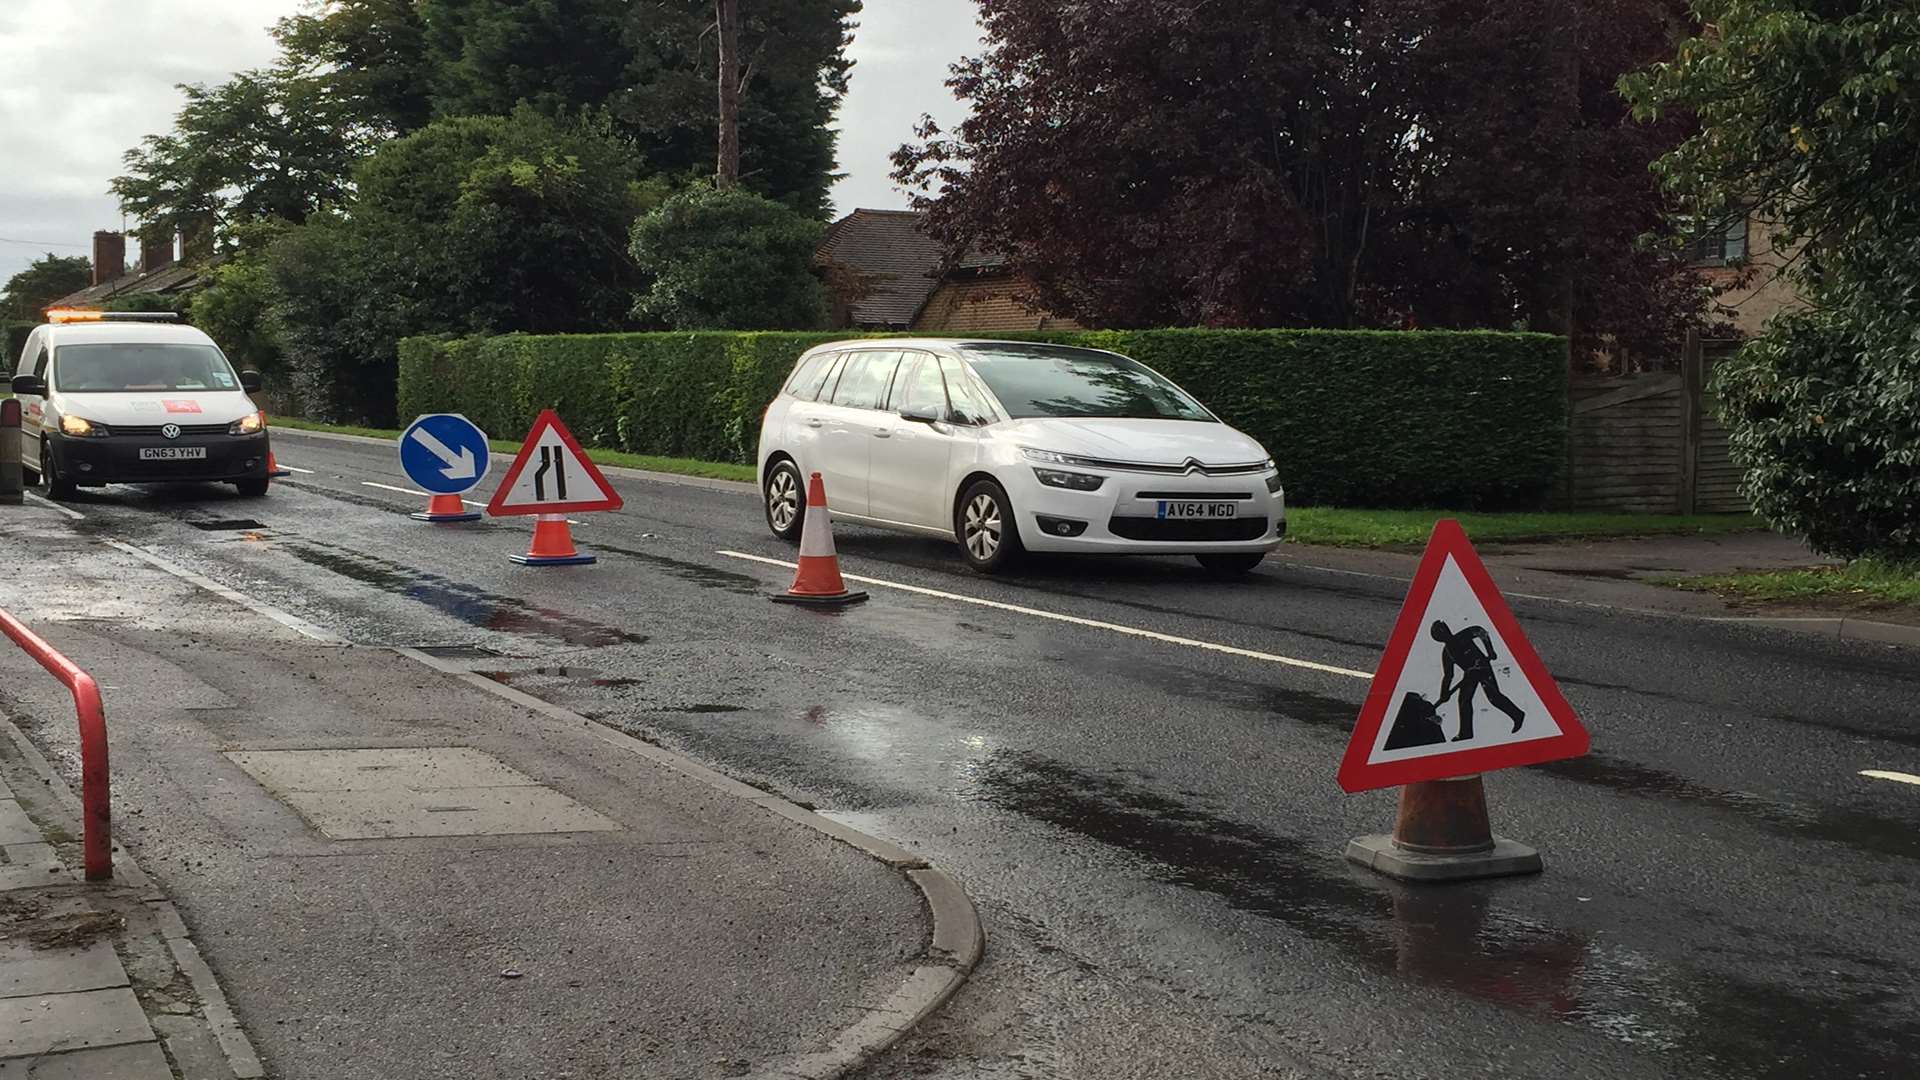 A hole opened up in Maidstone Road, Sutton Valence